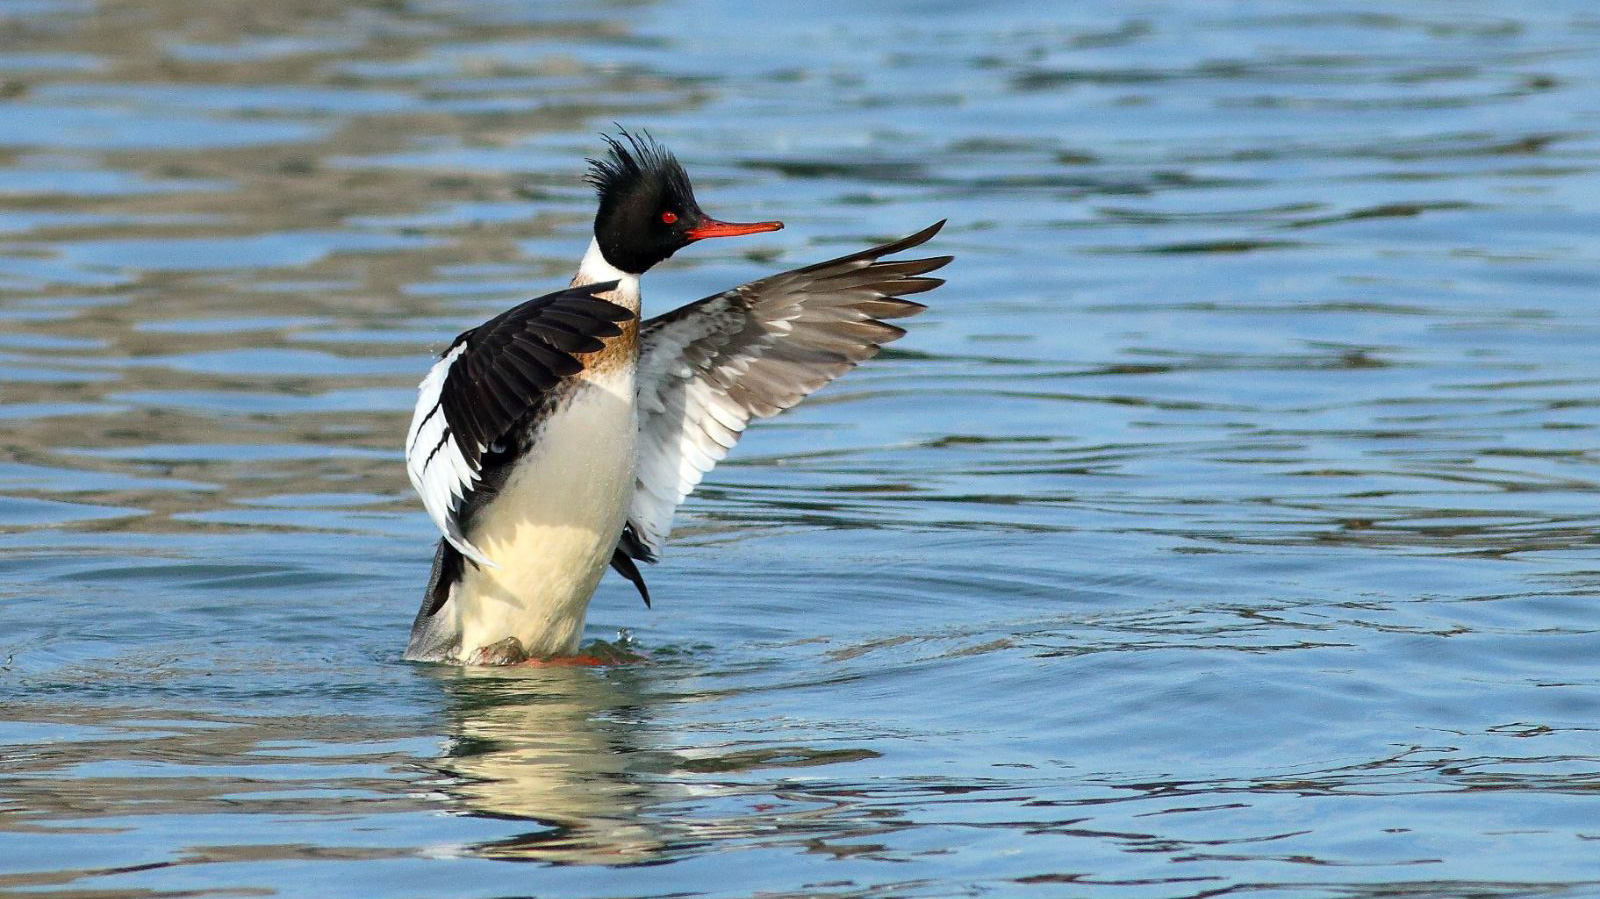 Photo: a male Red-breasted Merganser. Credit: Isaac Grant